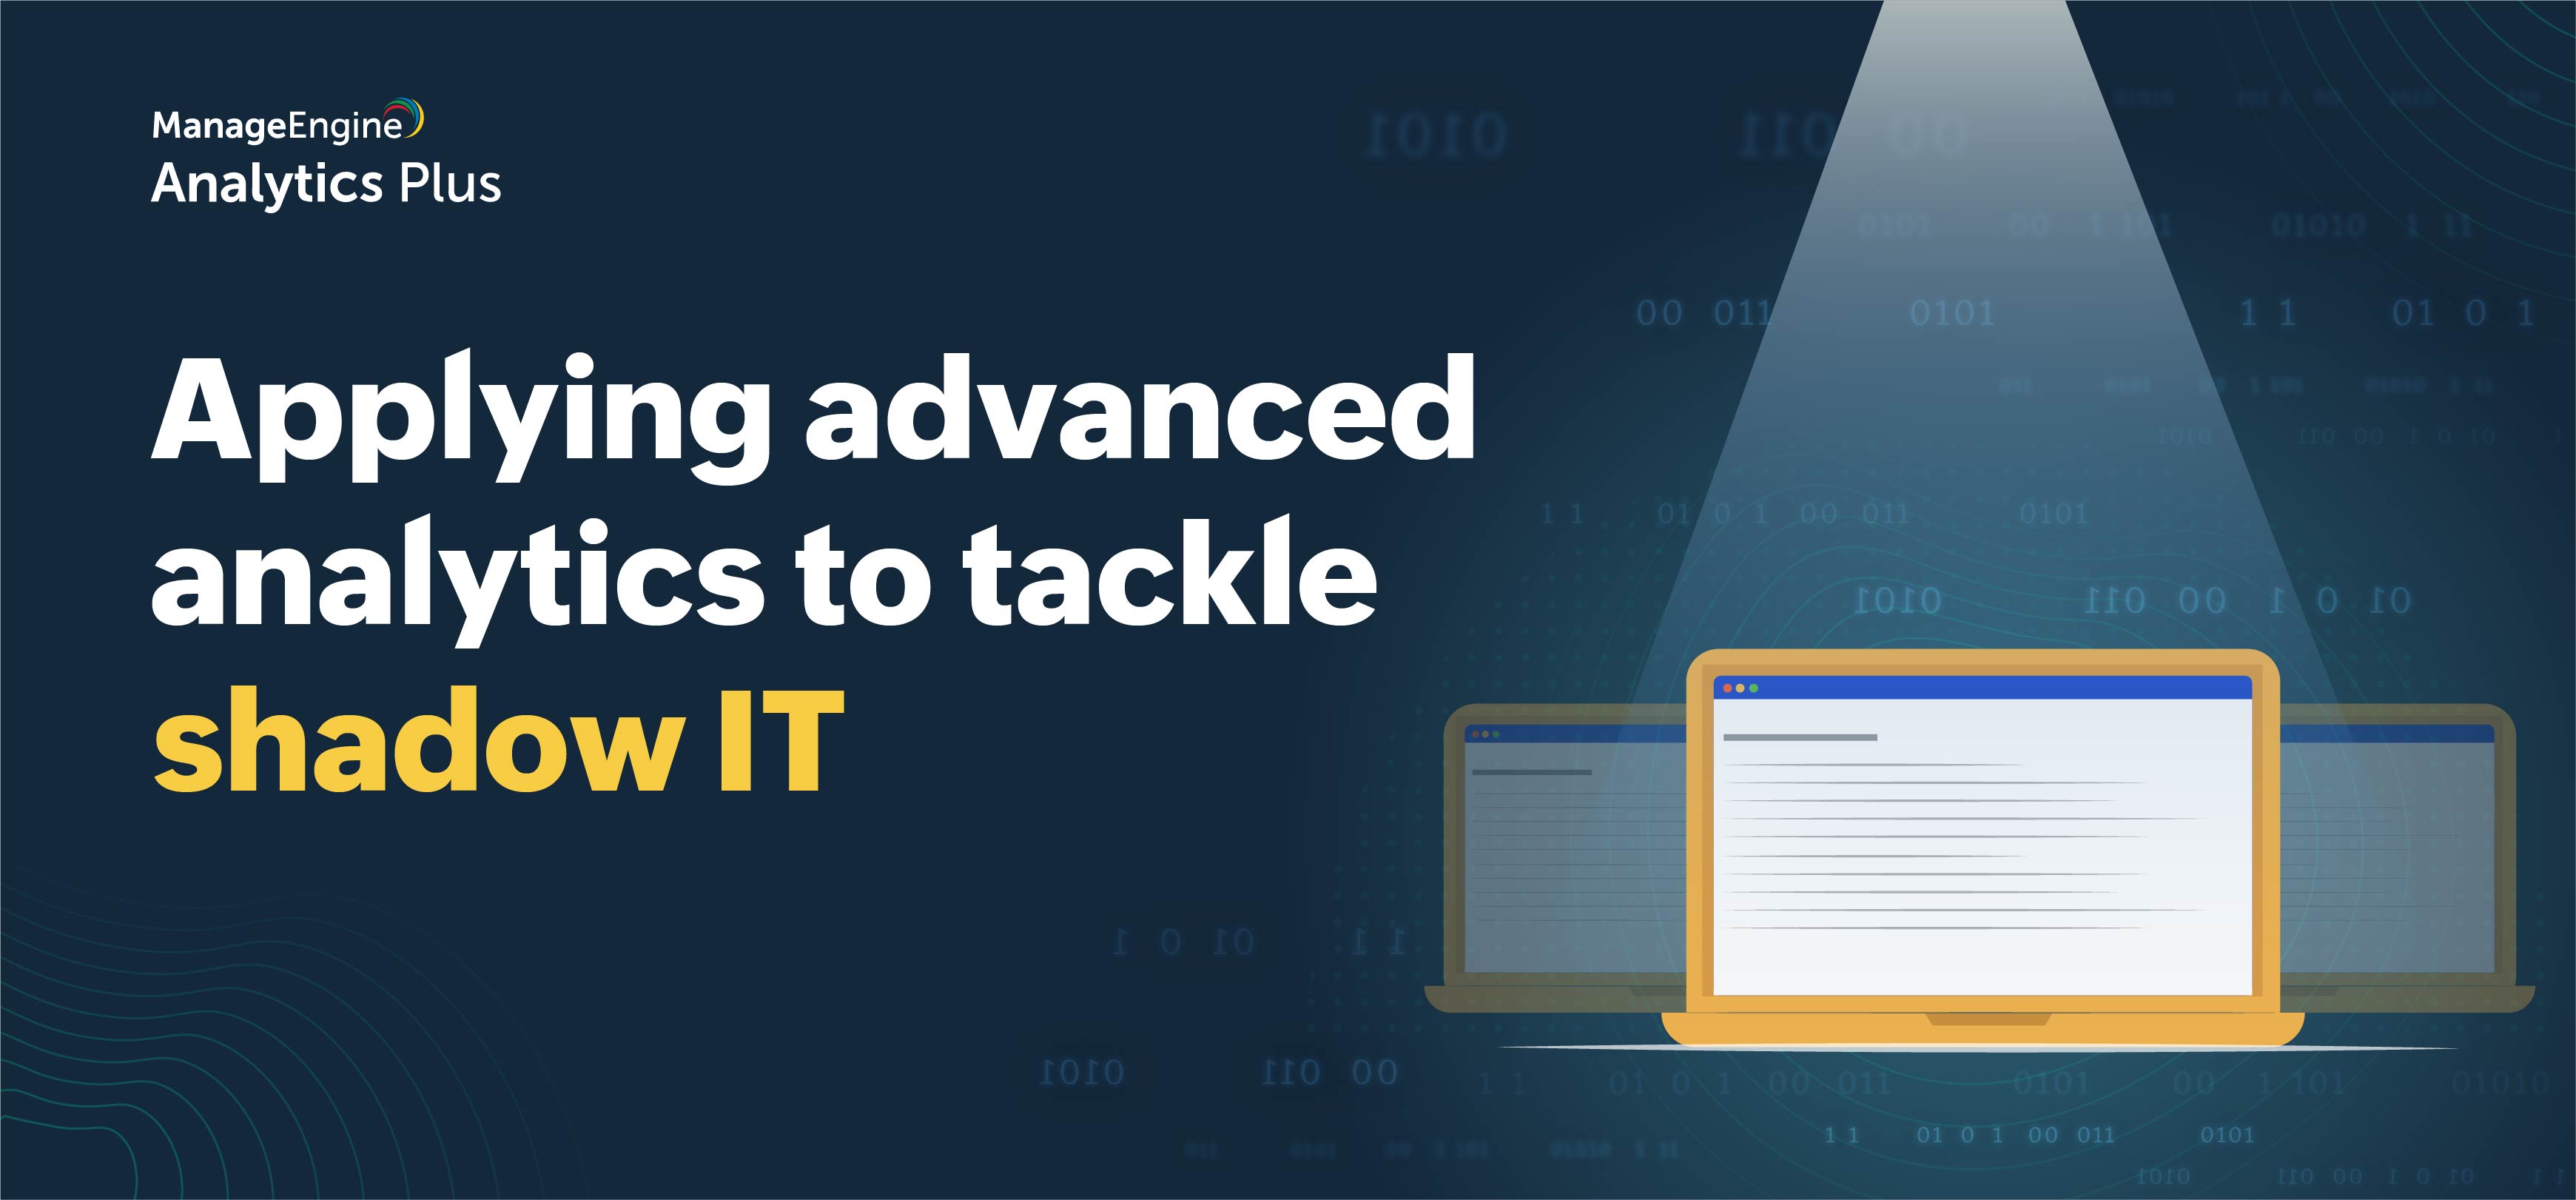 Applying advanced analytics to tackle shadow IT